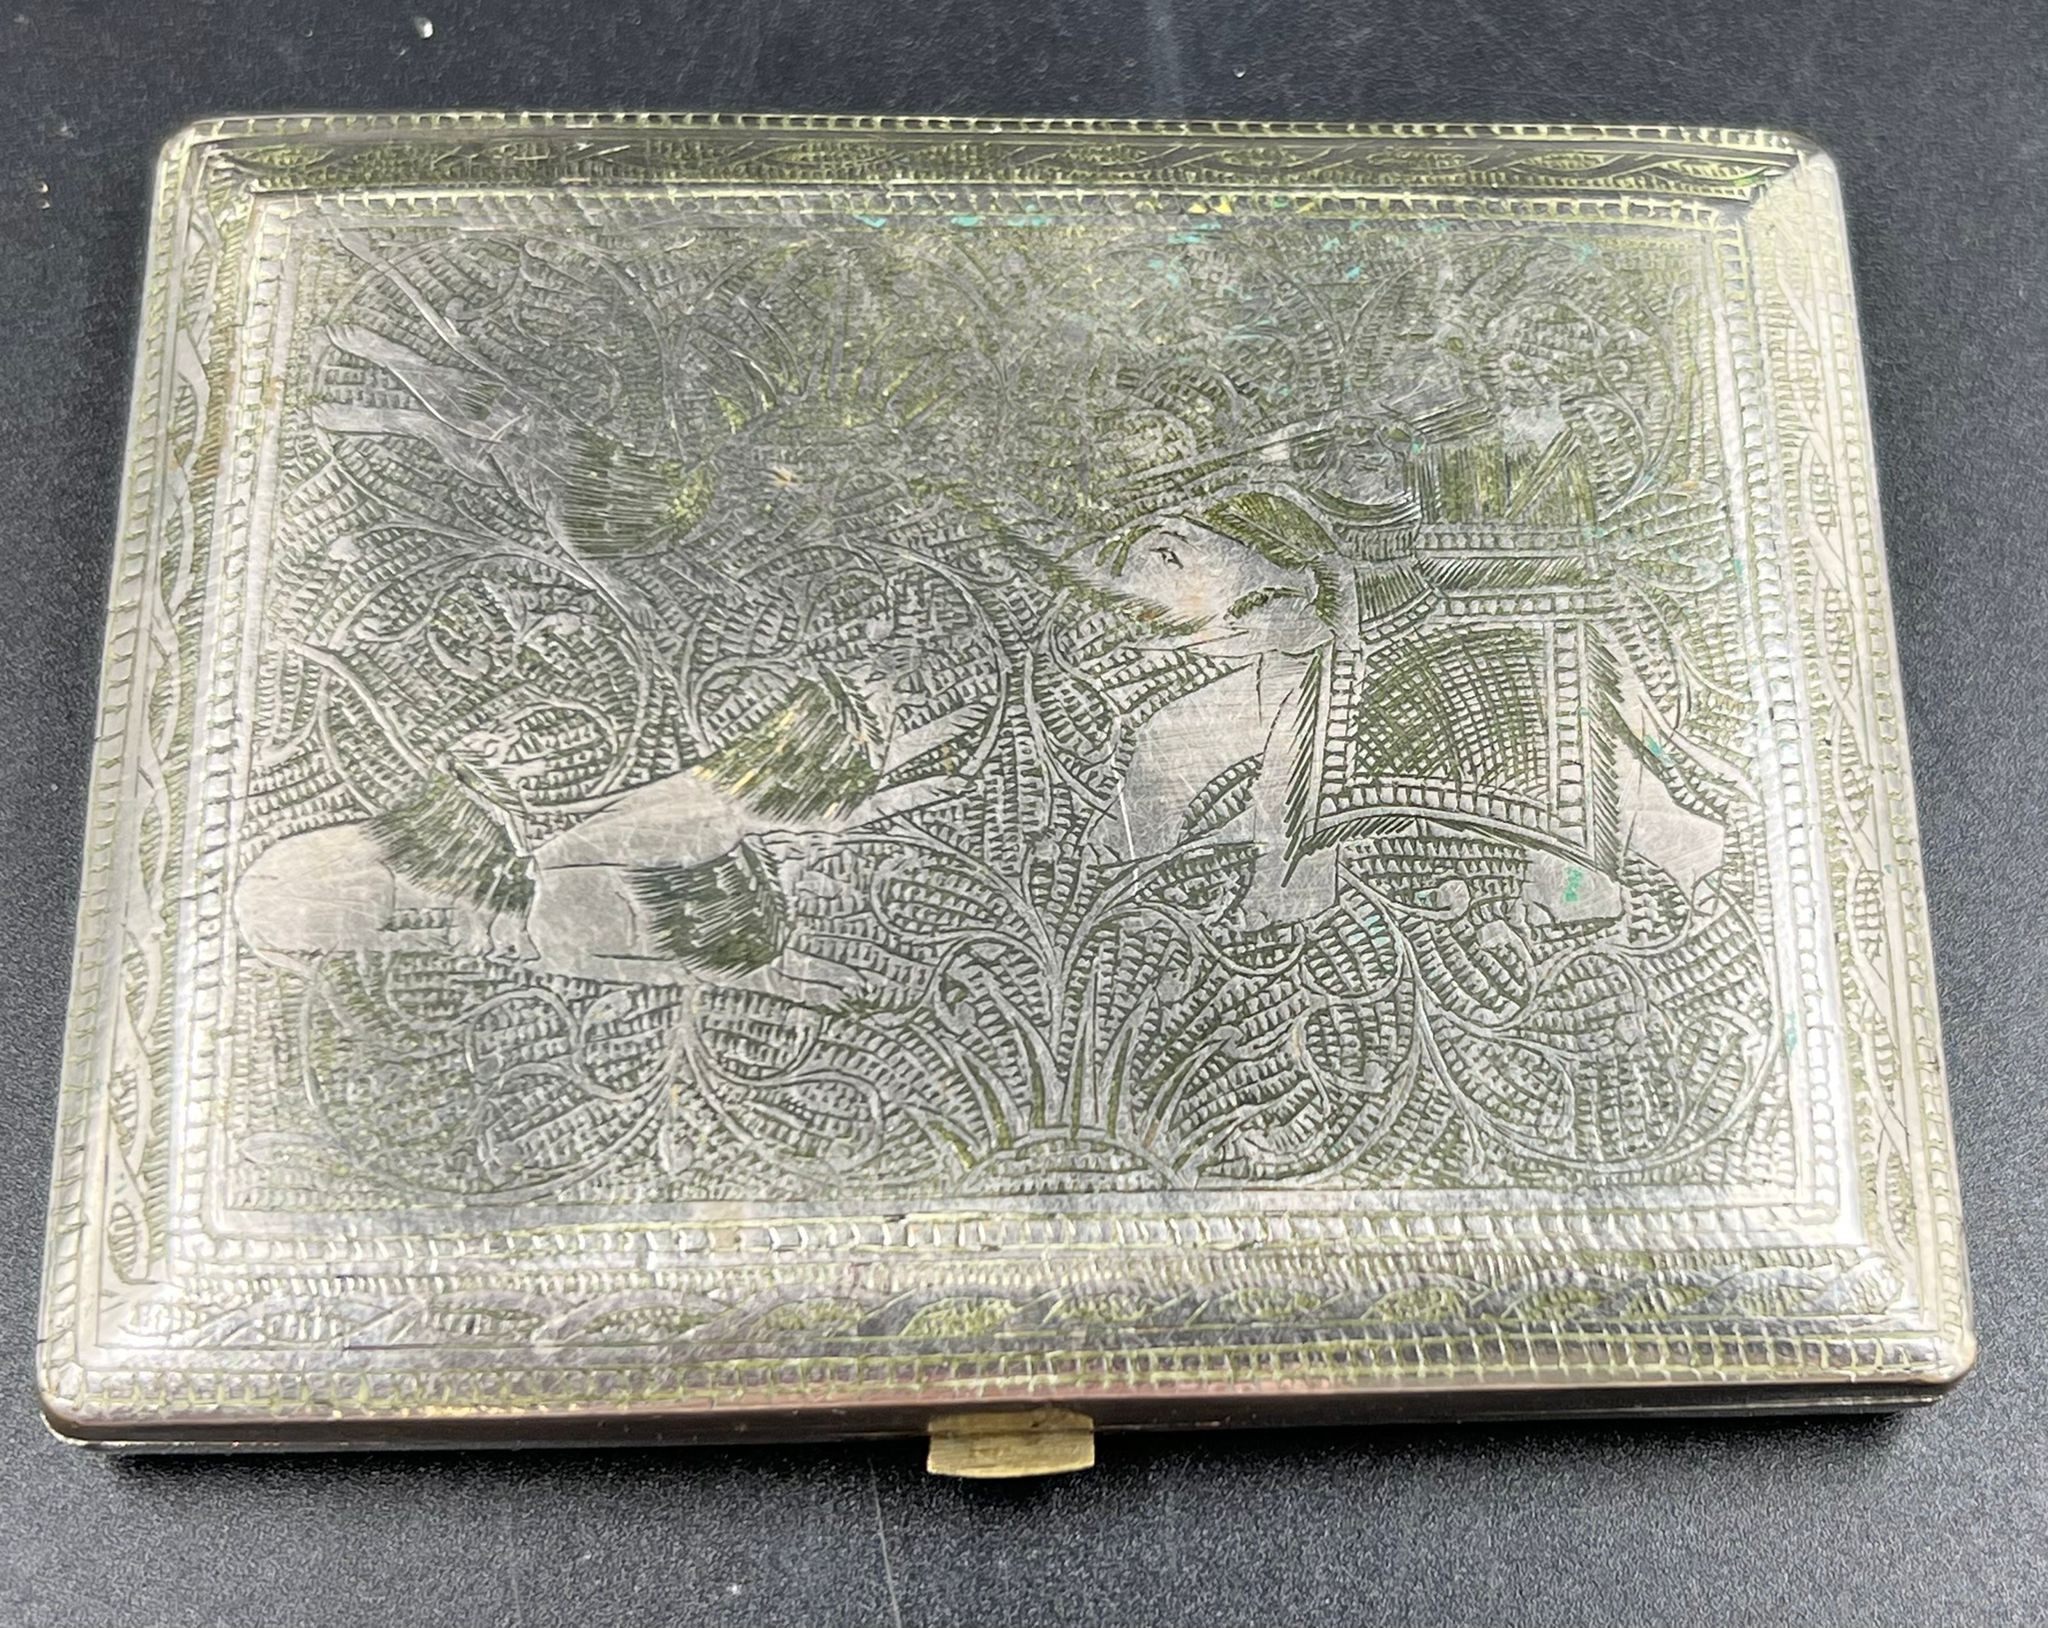 An Antique Indian Solid Silver Cigarette Case. Engraved with images of elephants and lions. Hinge